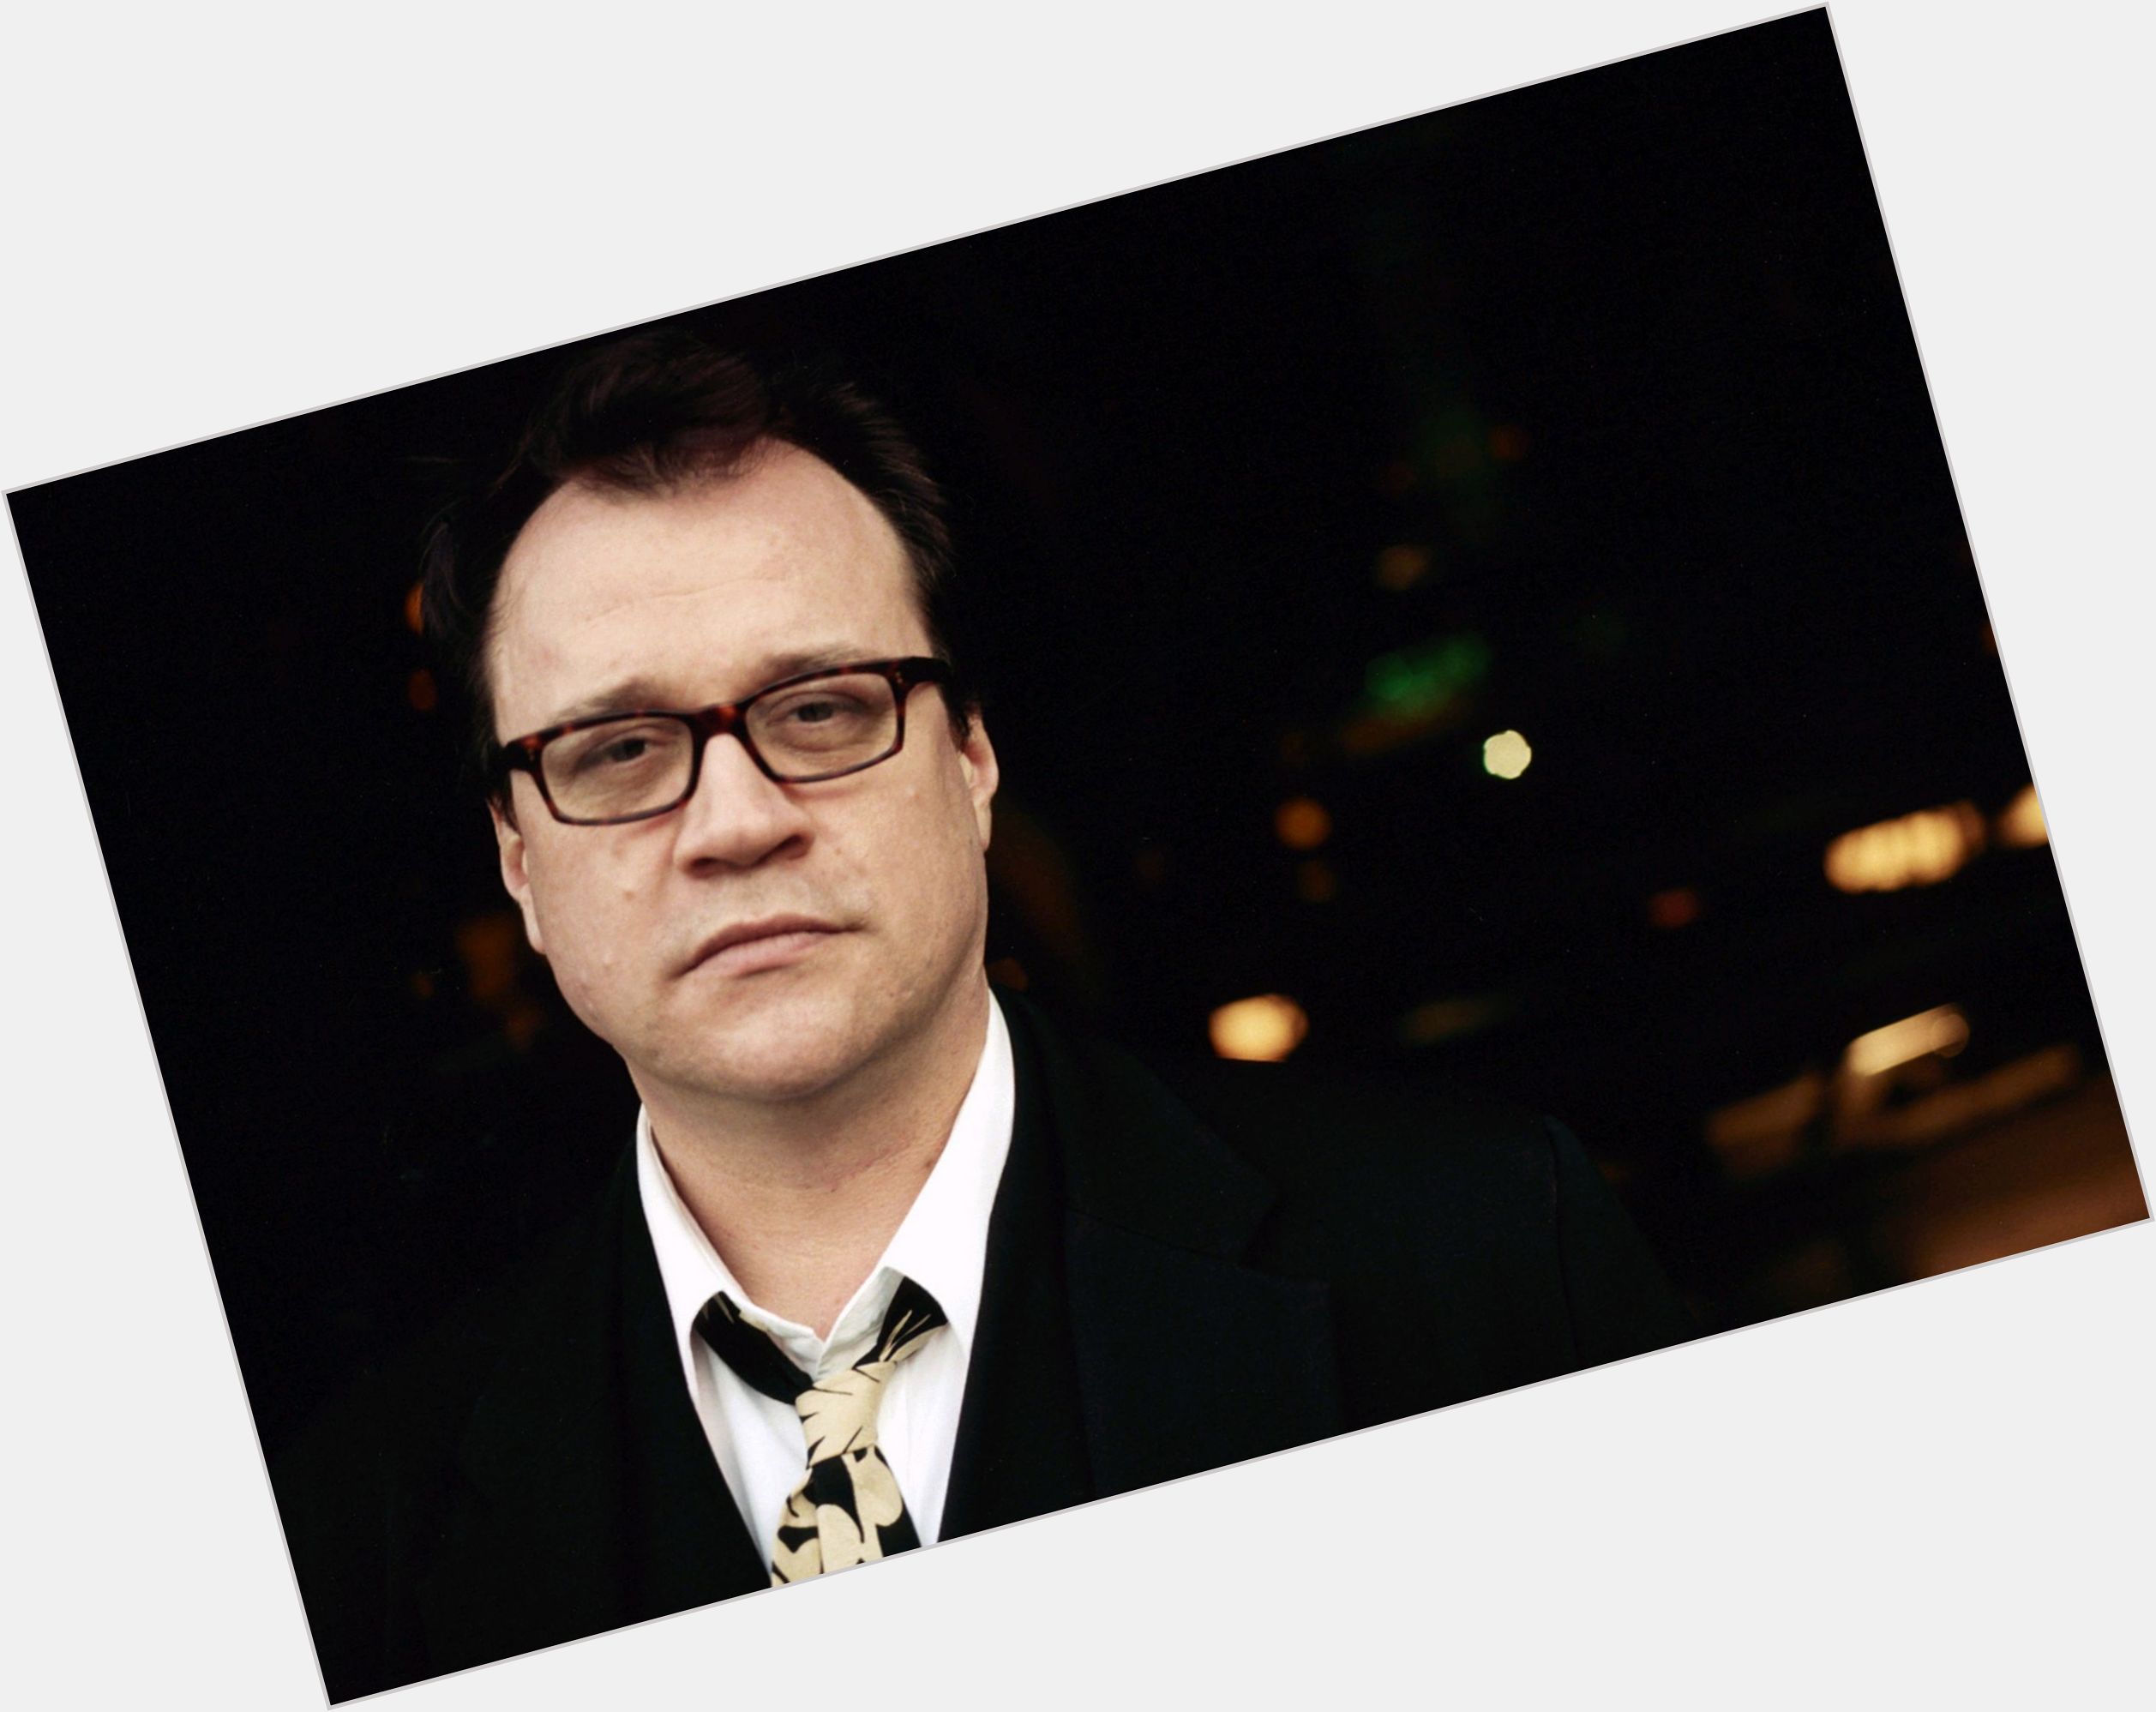 <a href="/hot-men/russell-t-davies/where-dating-news-photos">Russell T Davies</a> Average body,  dark brown hair & hairstyles